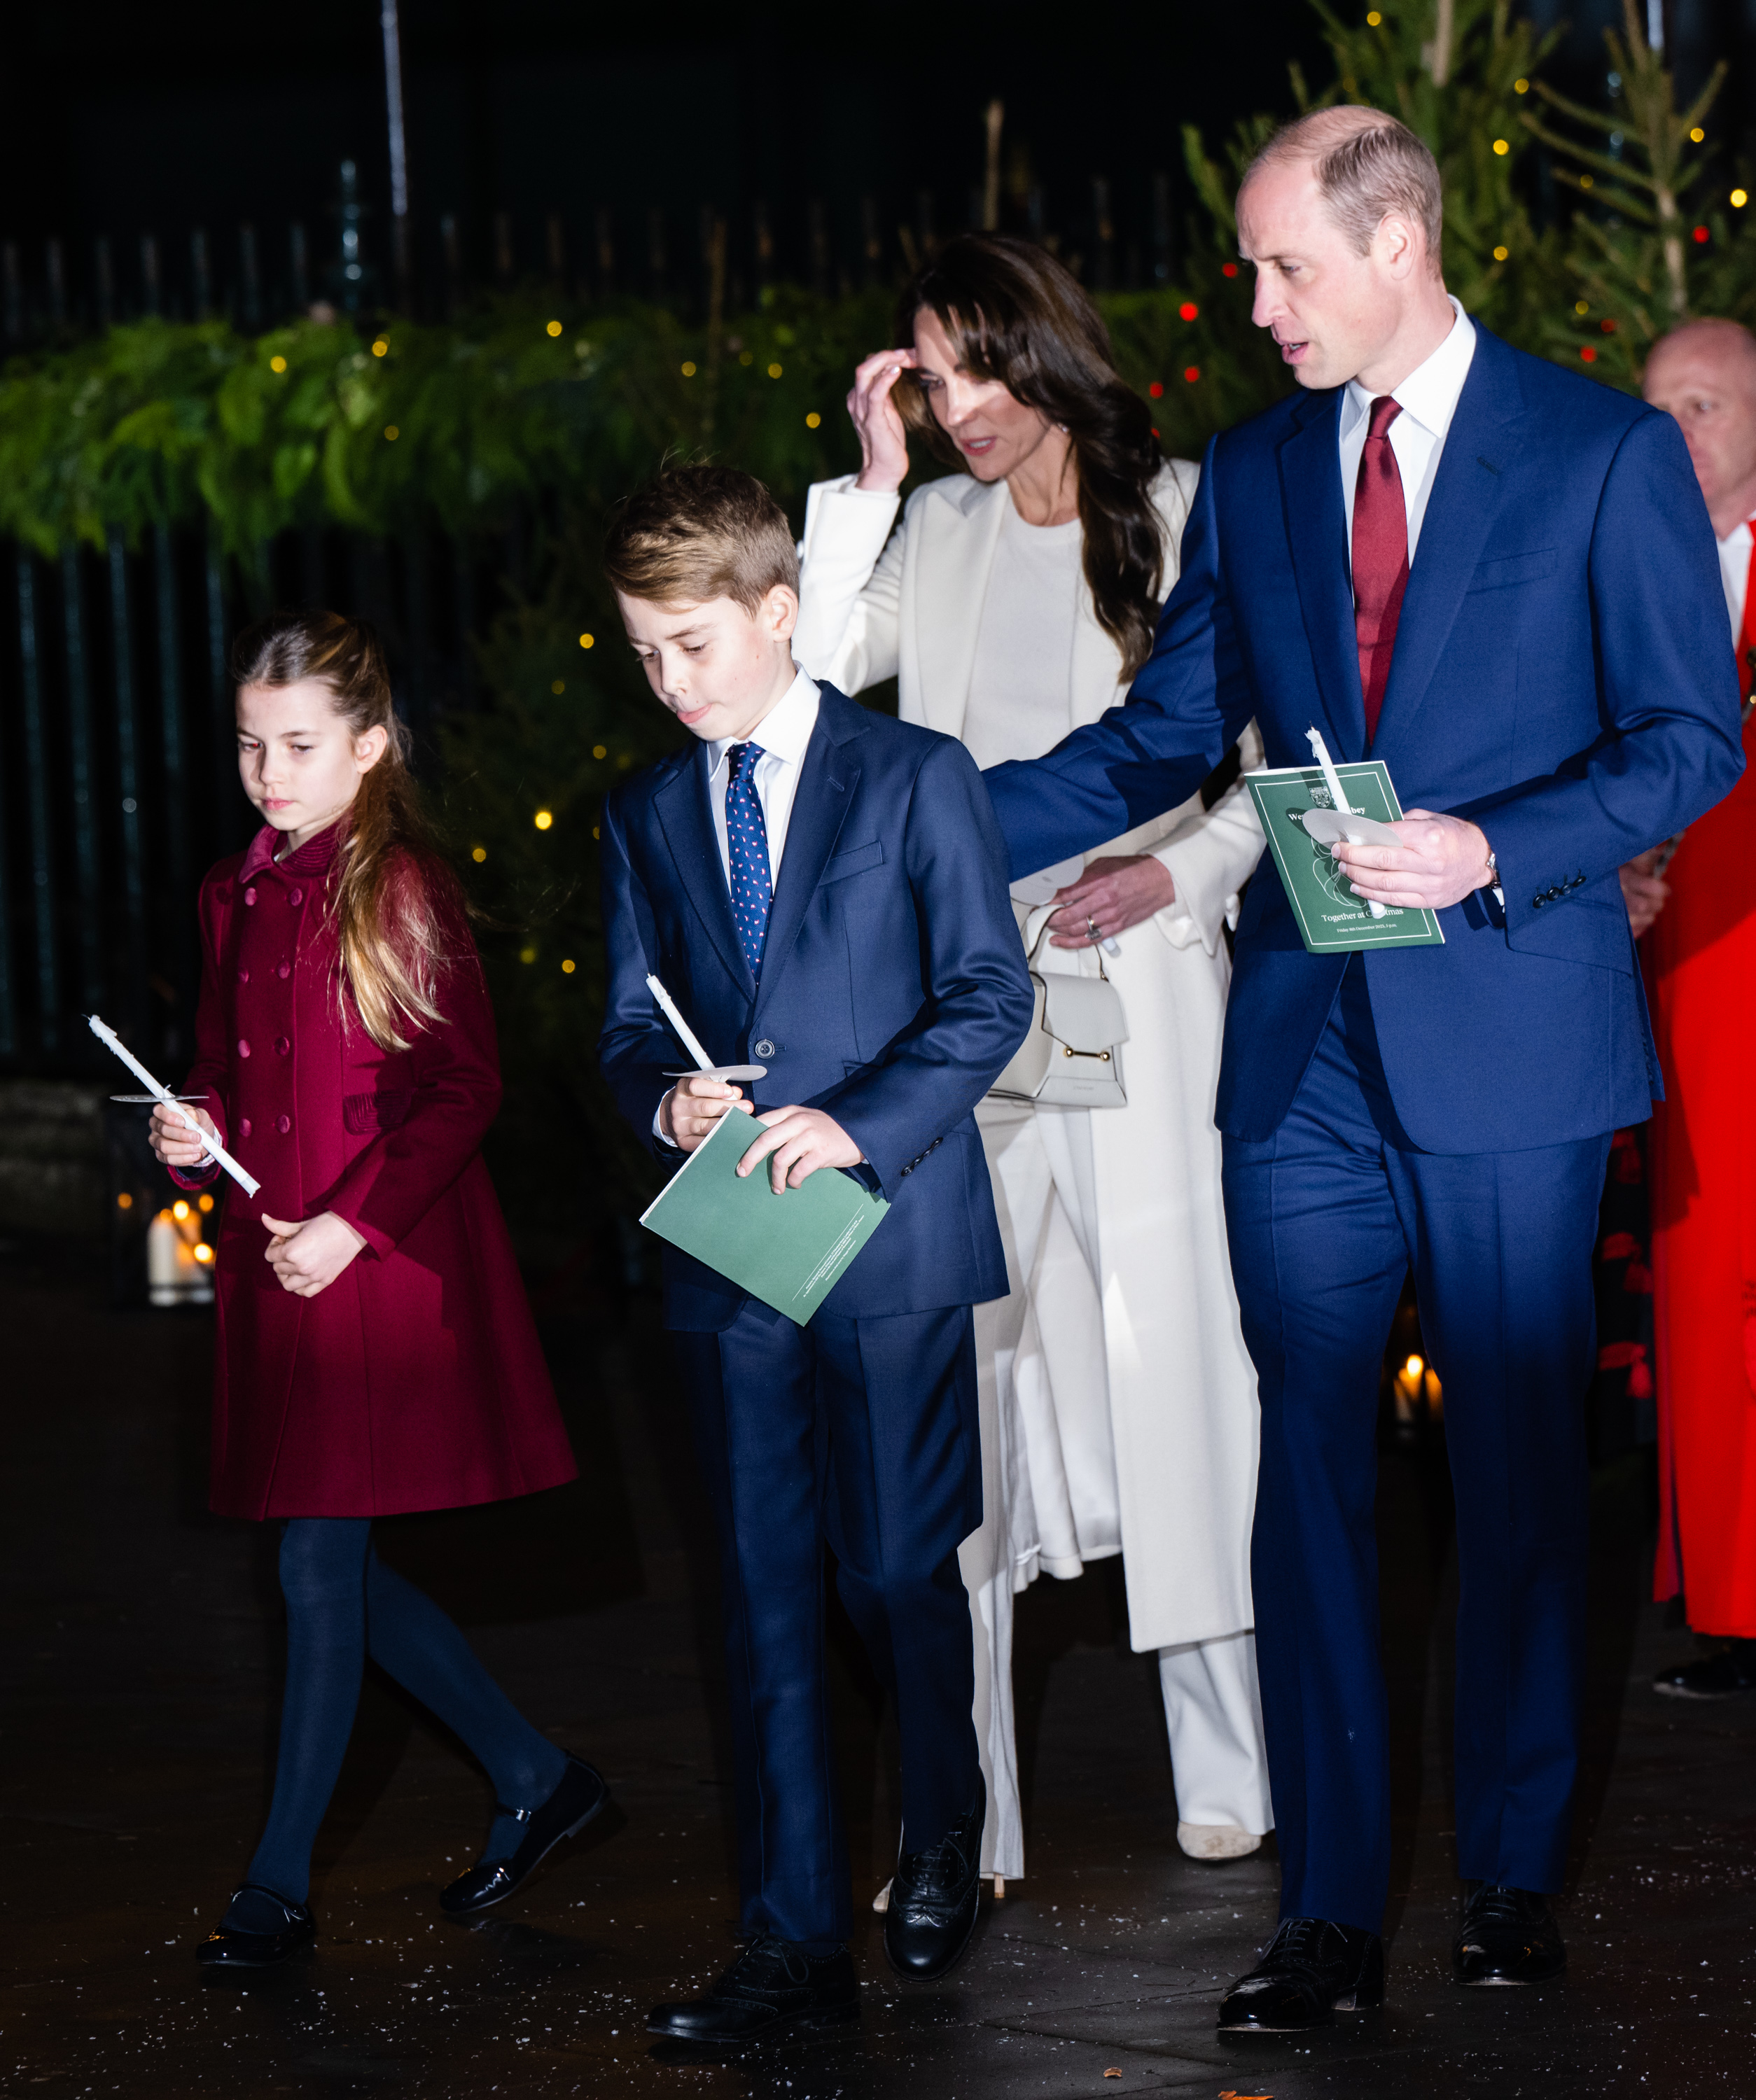 Prince William and family in formal attire at an evening event, holding programs